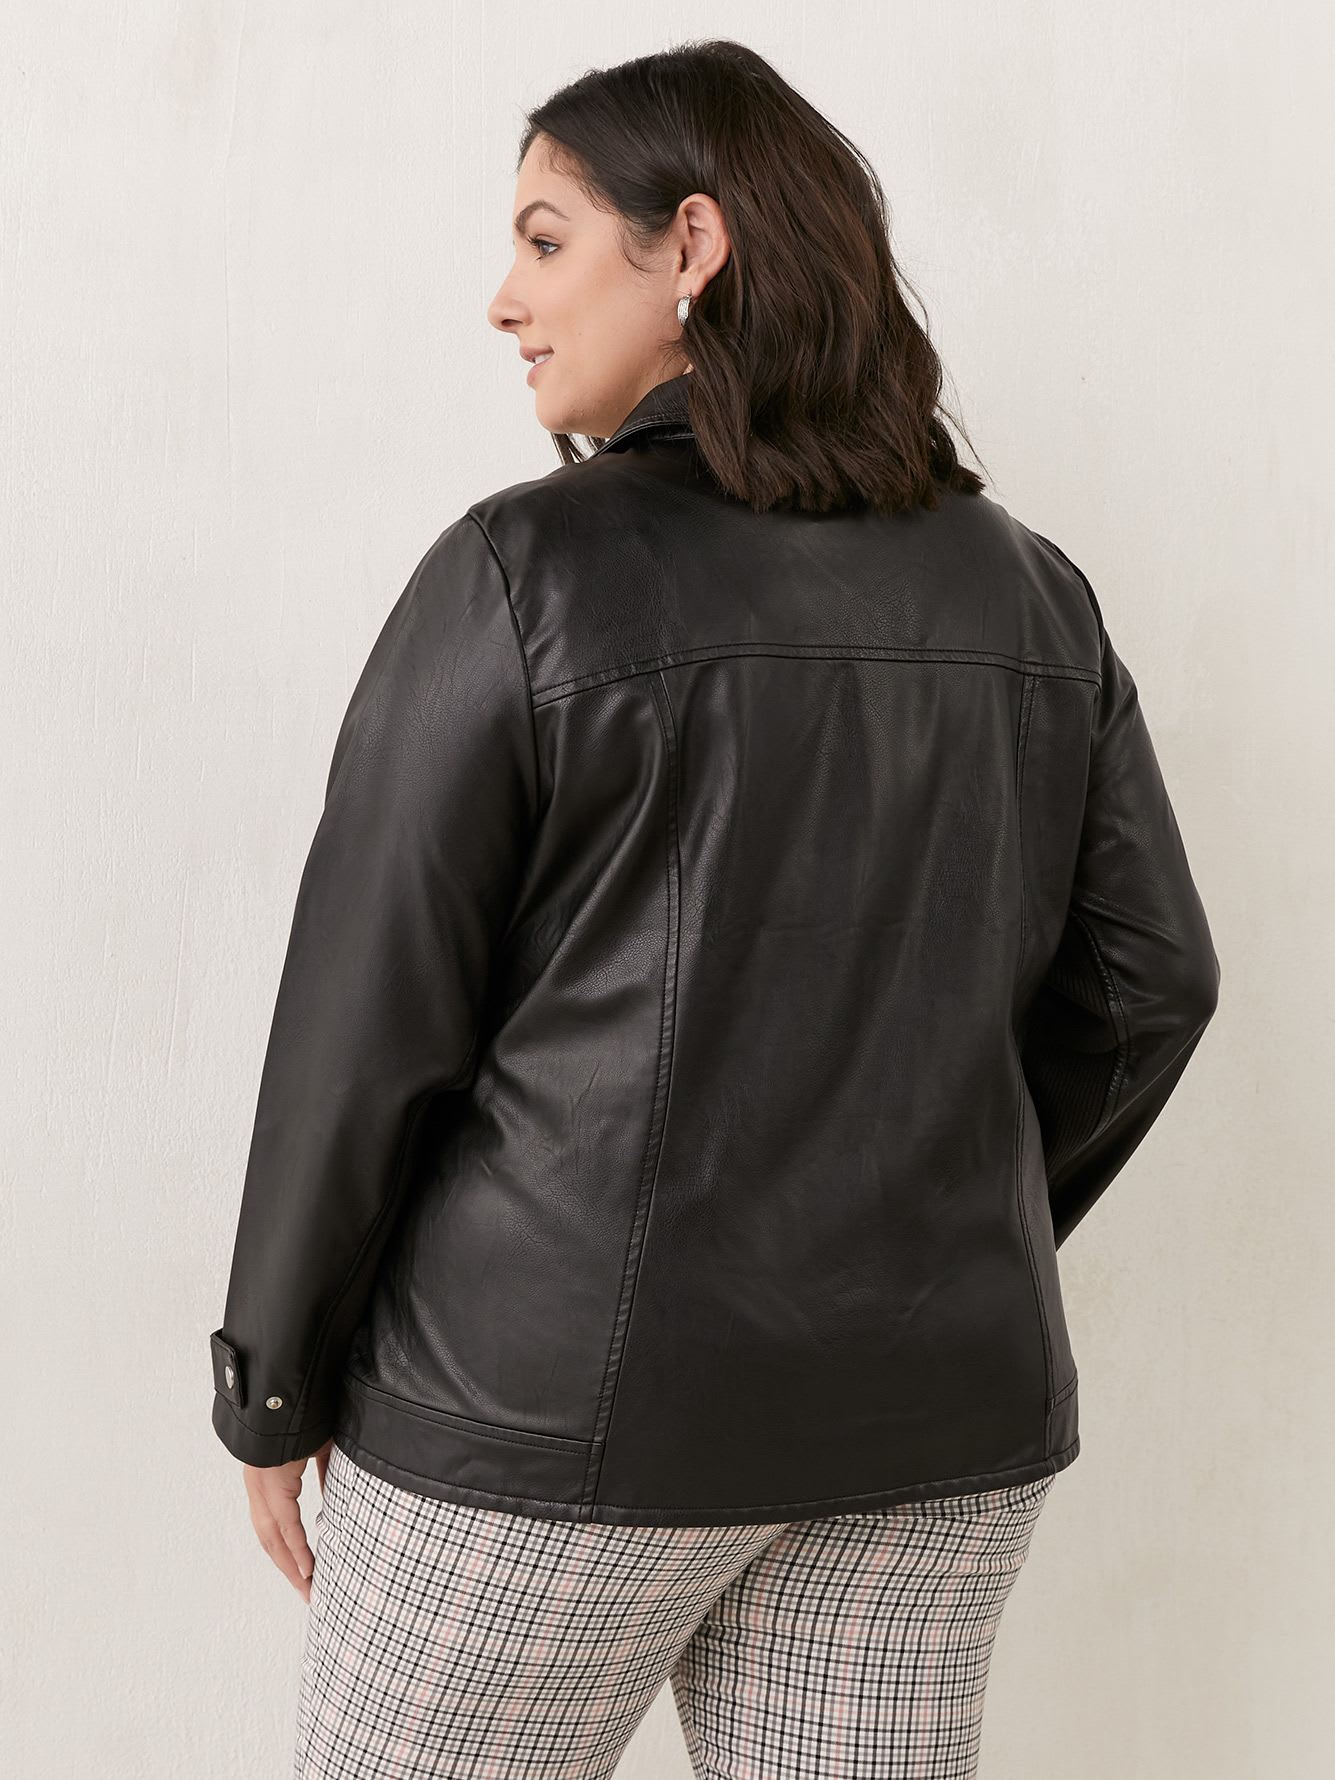 Mid-Length Moto Jacket - In Every Story